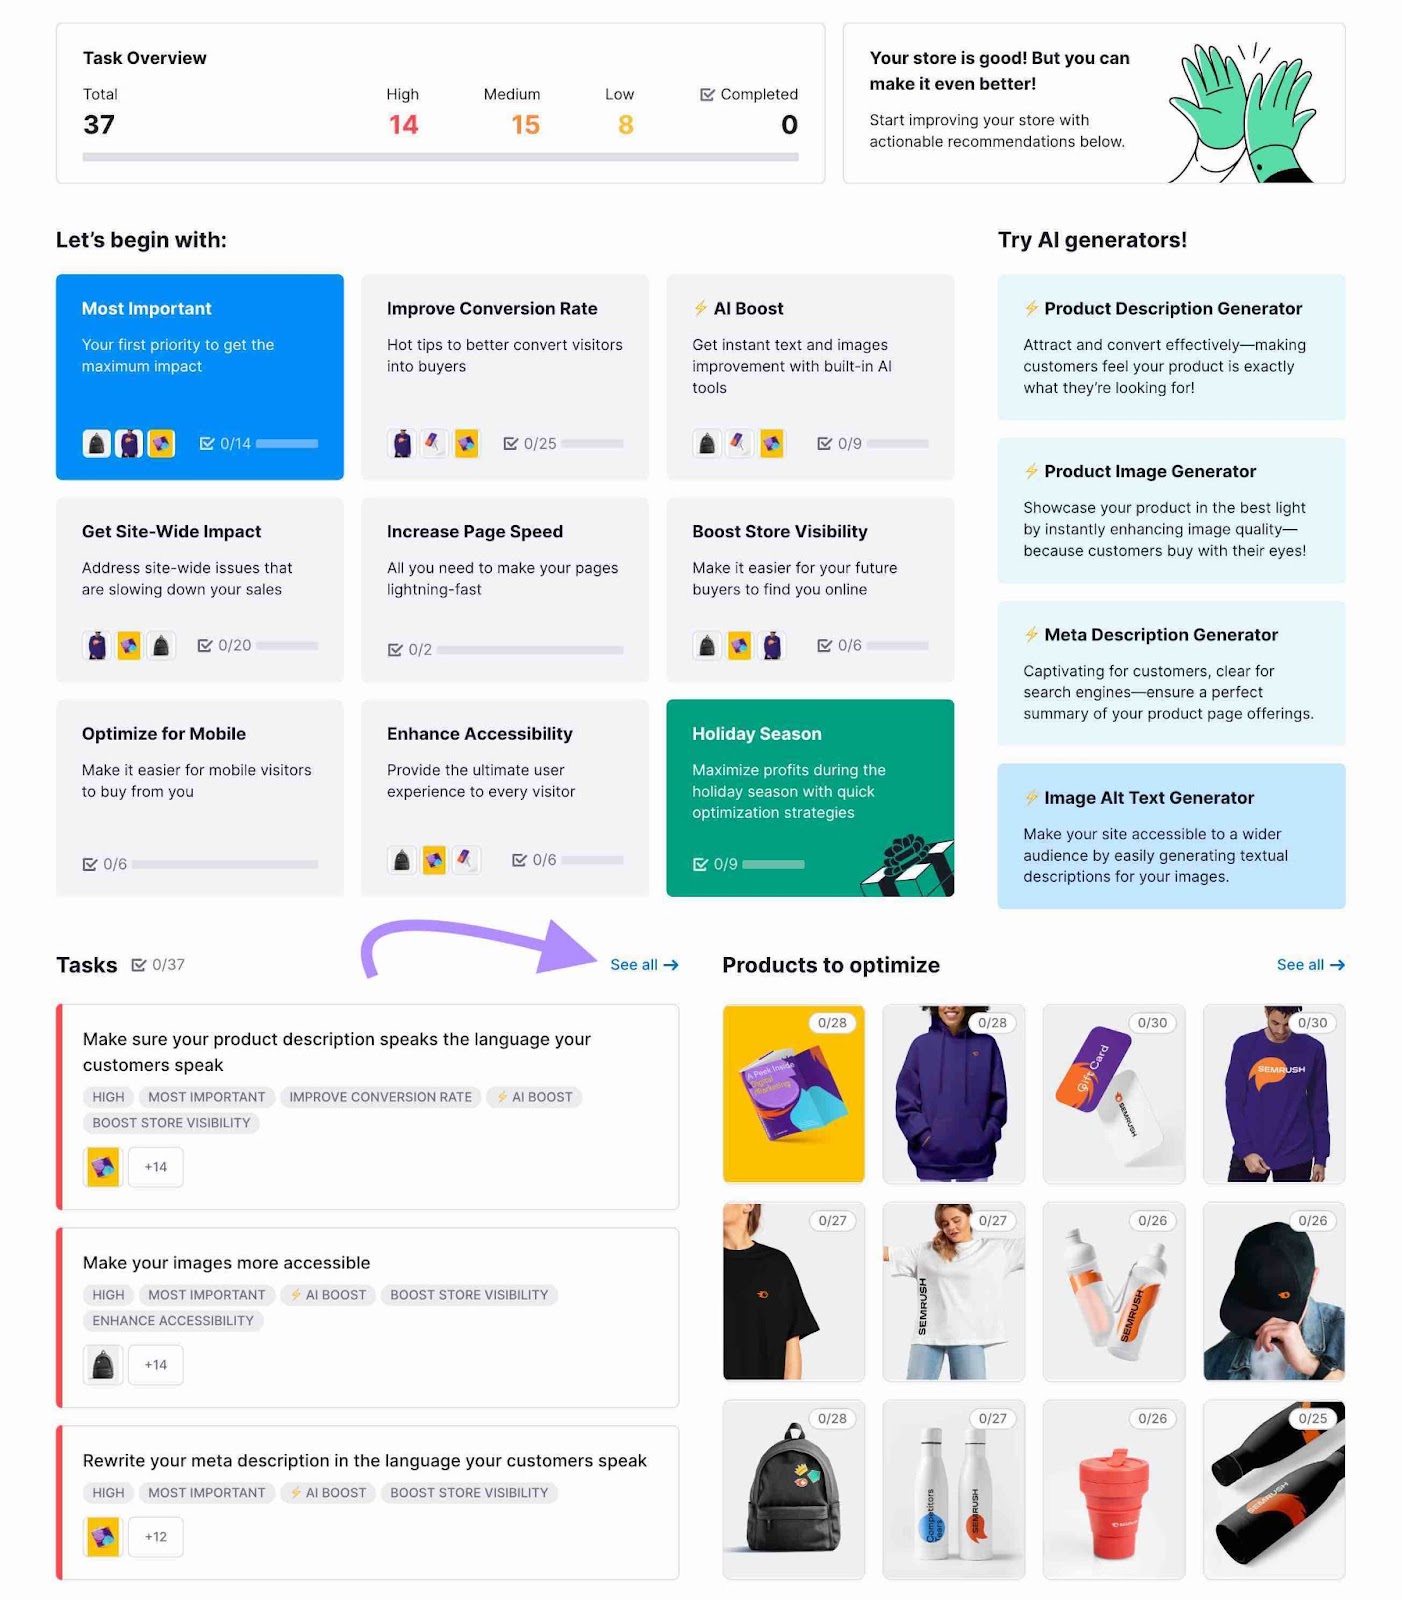 See all tasks in Ecommerce Booster